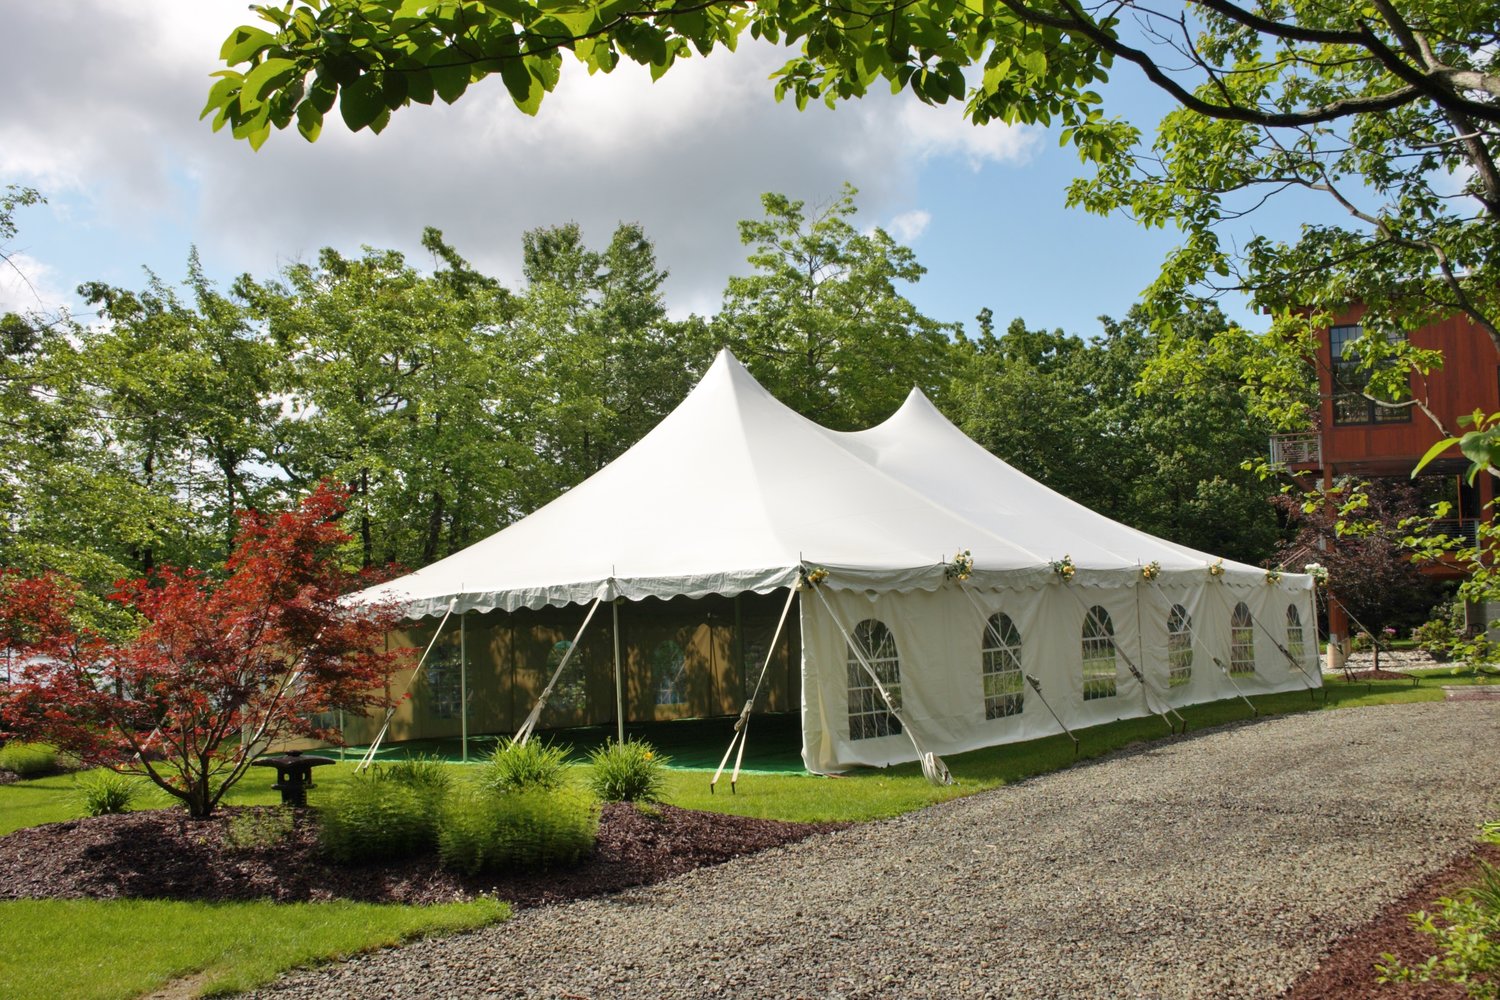 How To Create The Best Layout For Your Outdoor Tented Event Tents For Rent.